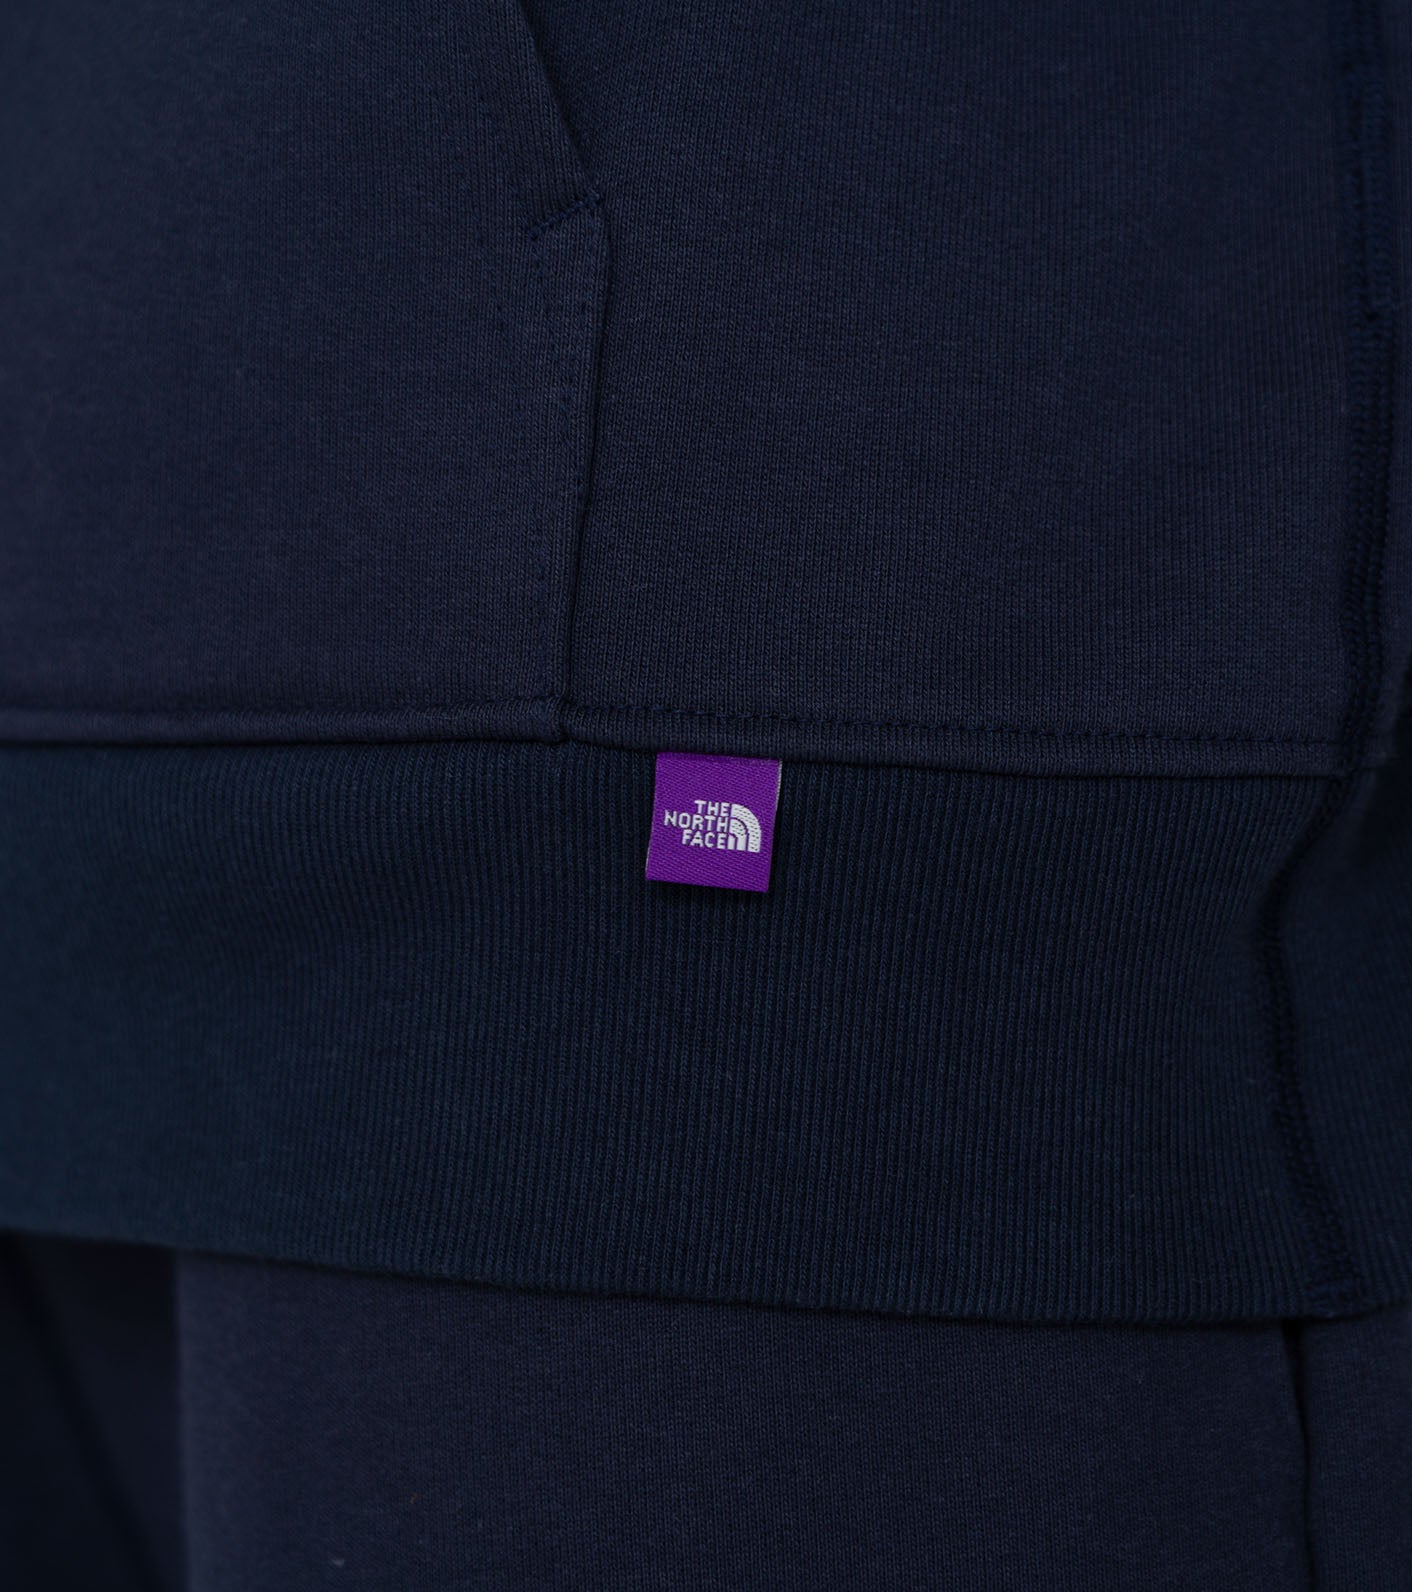 THE NORTH FACE PURPLE LABEL Field Hoodie